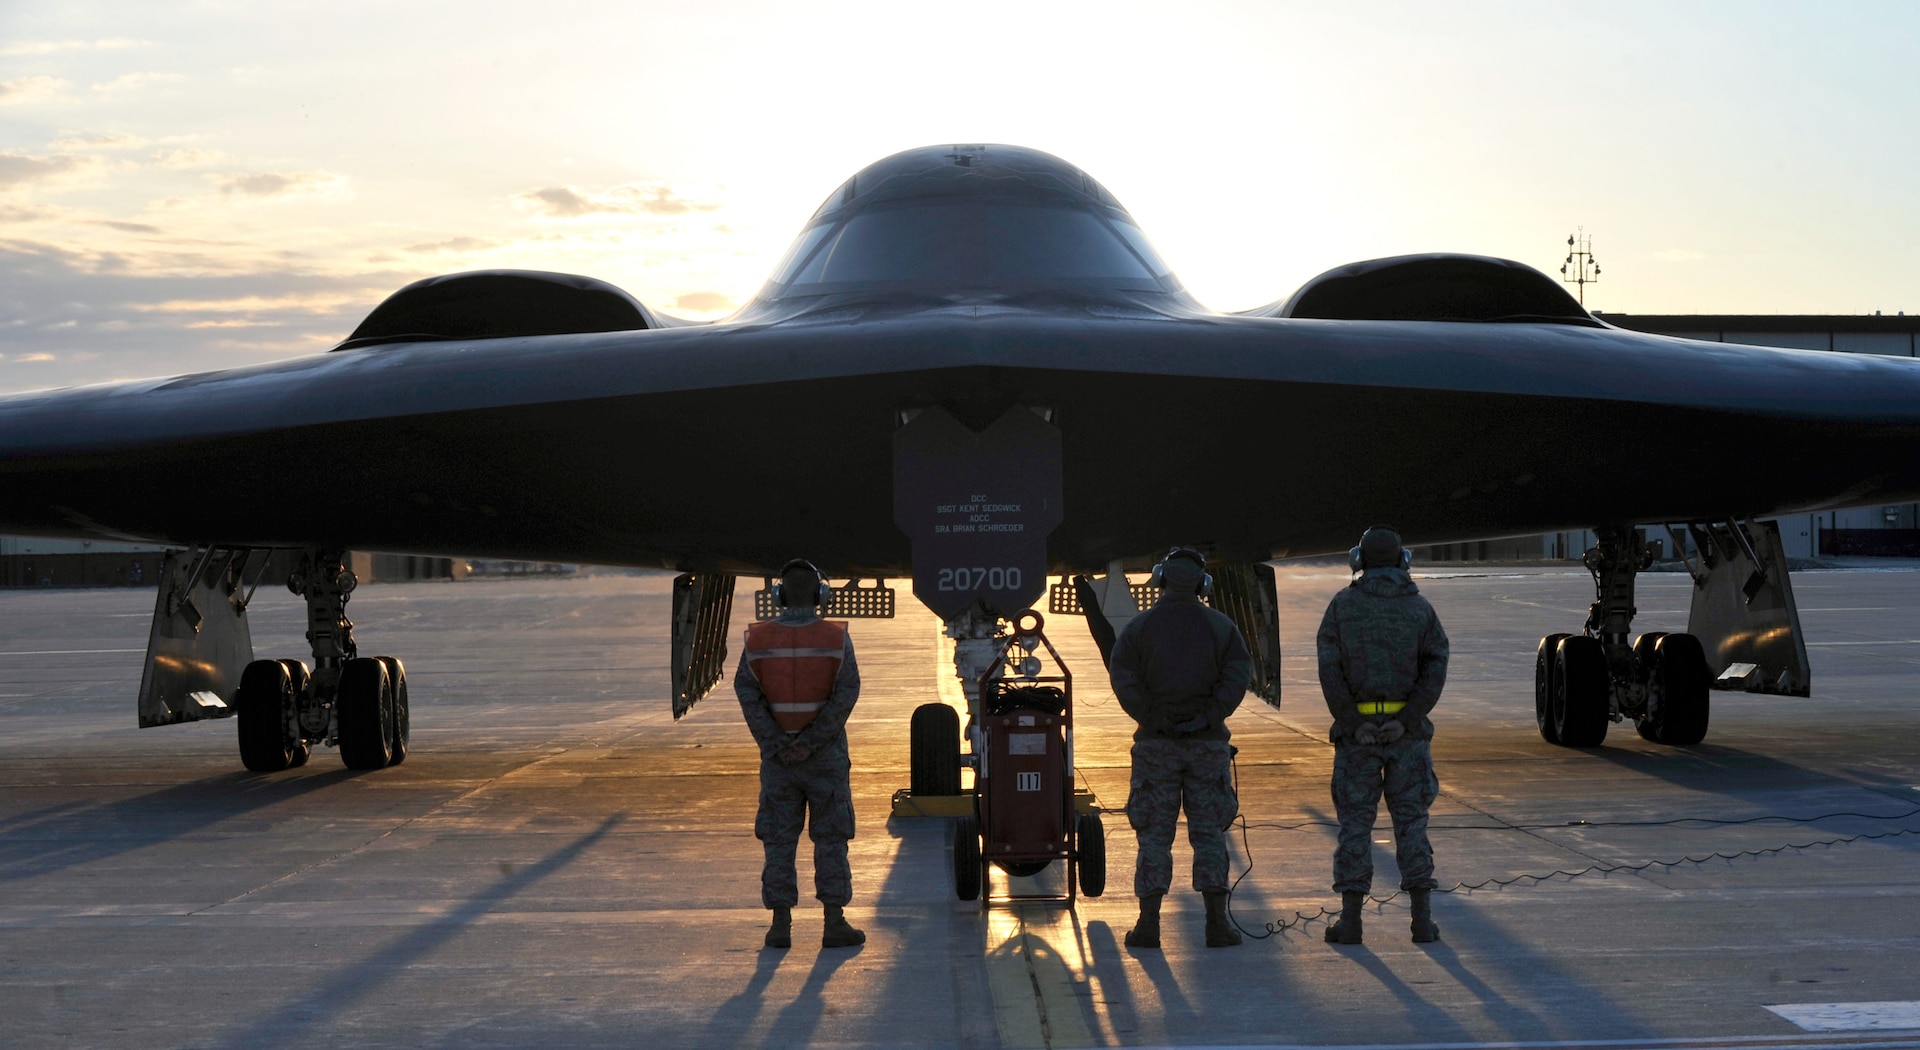 U.S. Air Force B-2 Spirit crew chiefs stand ready to perform maintenance on the "Spirit of Florida" after completing a historic training mission in which it became the first B-2 to reach 7,000 flight hours, Whiteman Air Force Base, Mo., April 1, 2013.